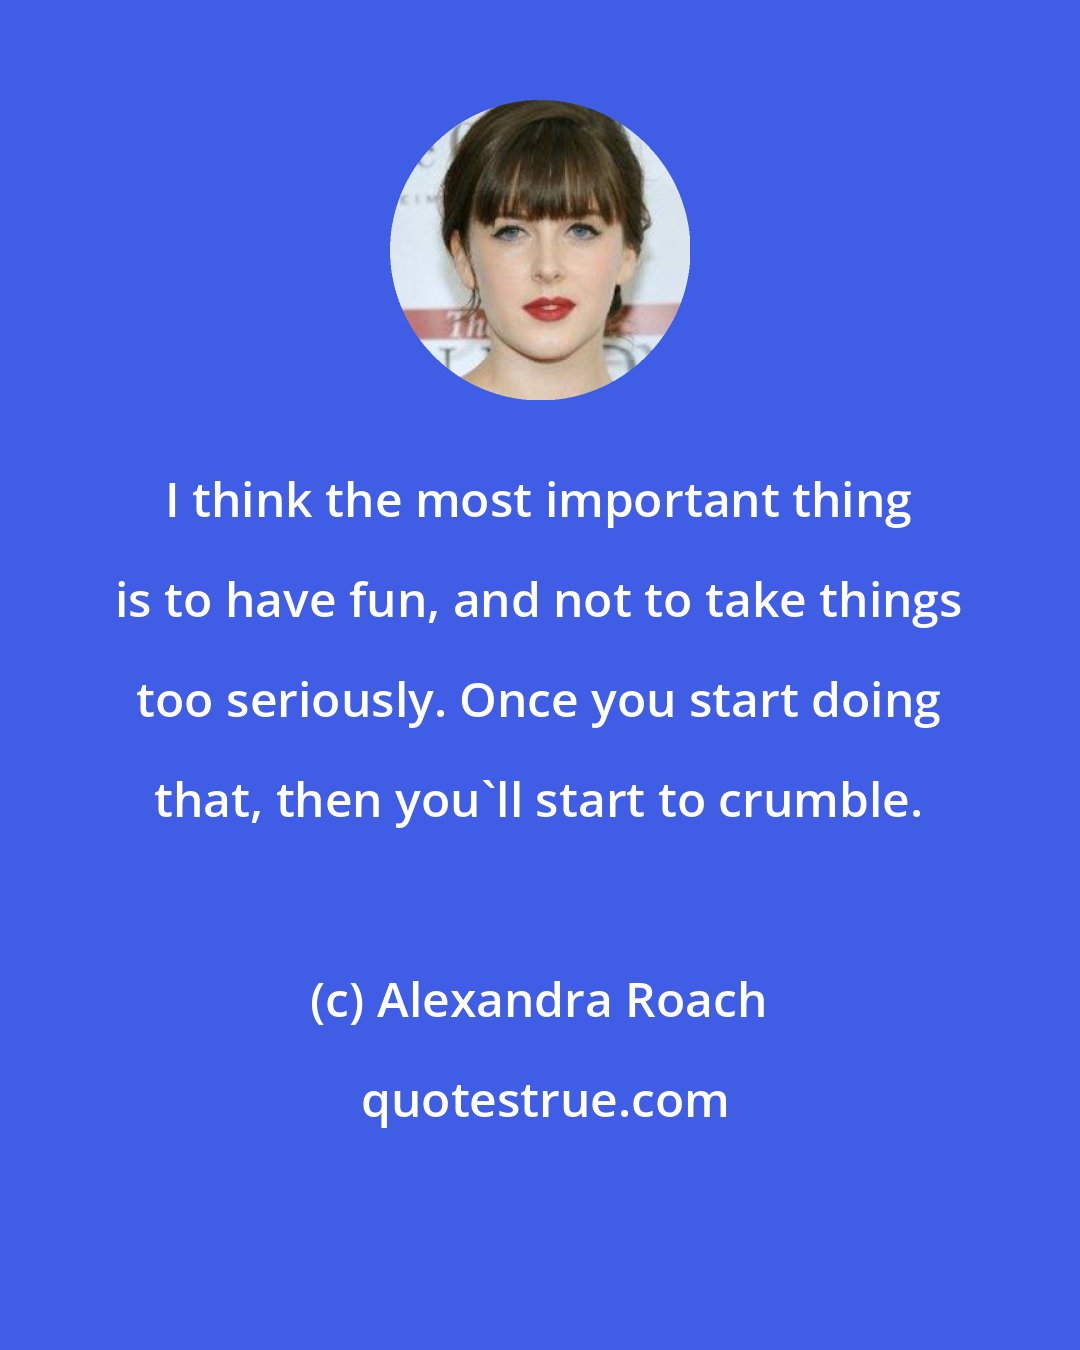 Alexandra Roach: I think the most important thing is to have fun, and not to take things too seriously. Once you start doing that, then you'll start to crumble.